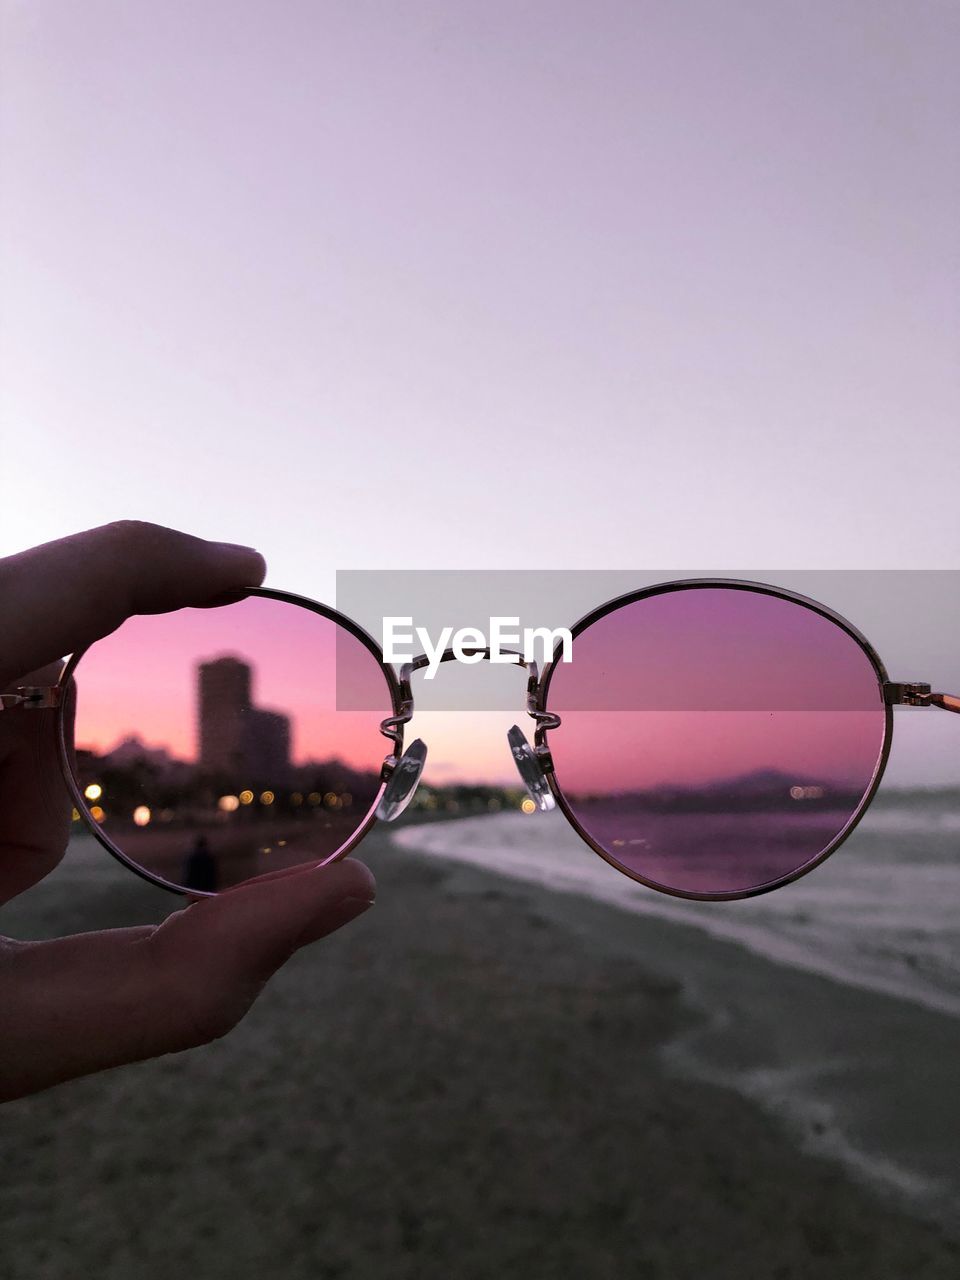 Cropped hand holding sunglasses against clear sky during sunset